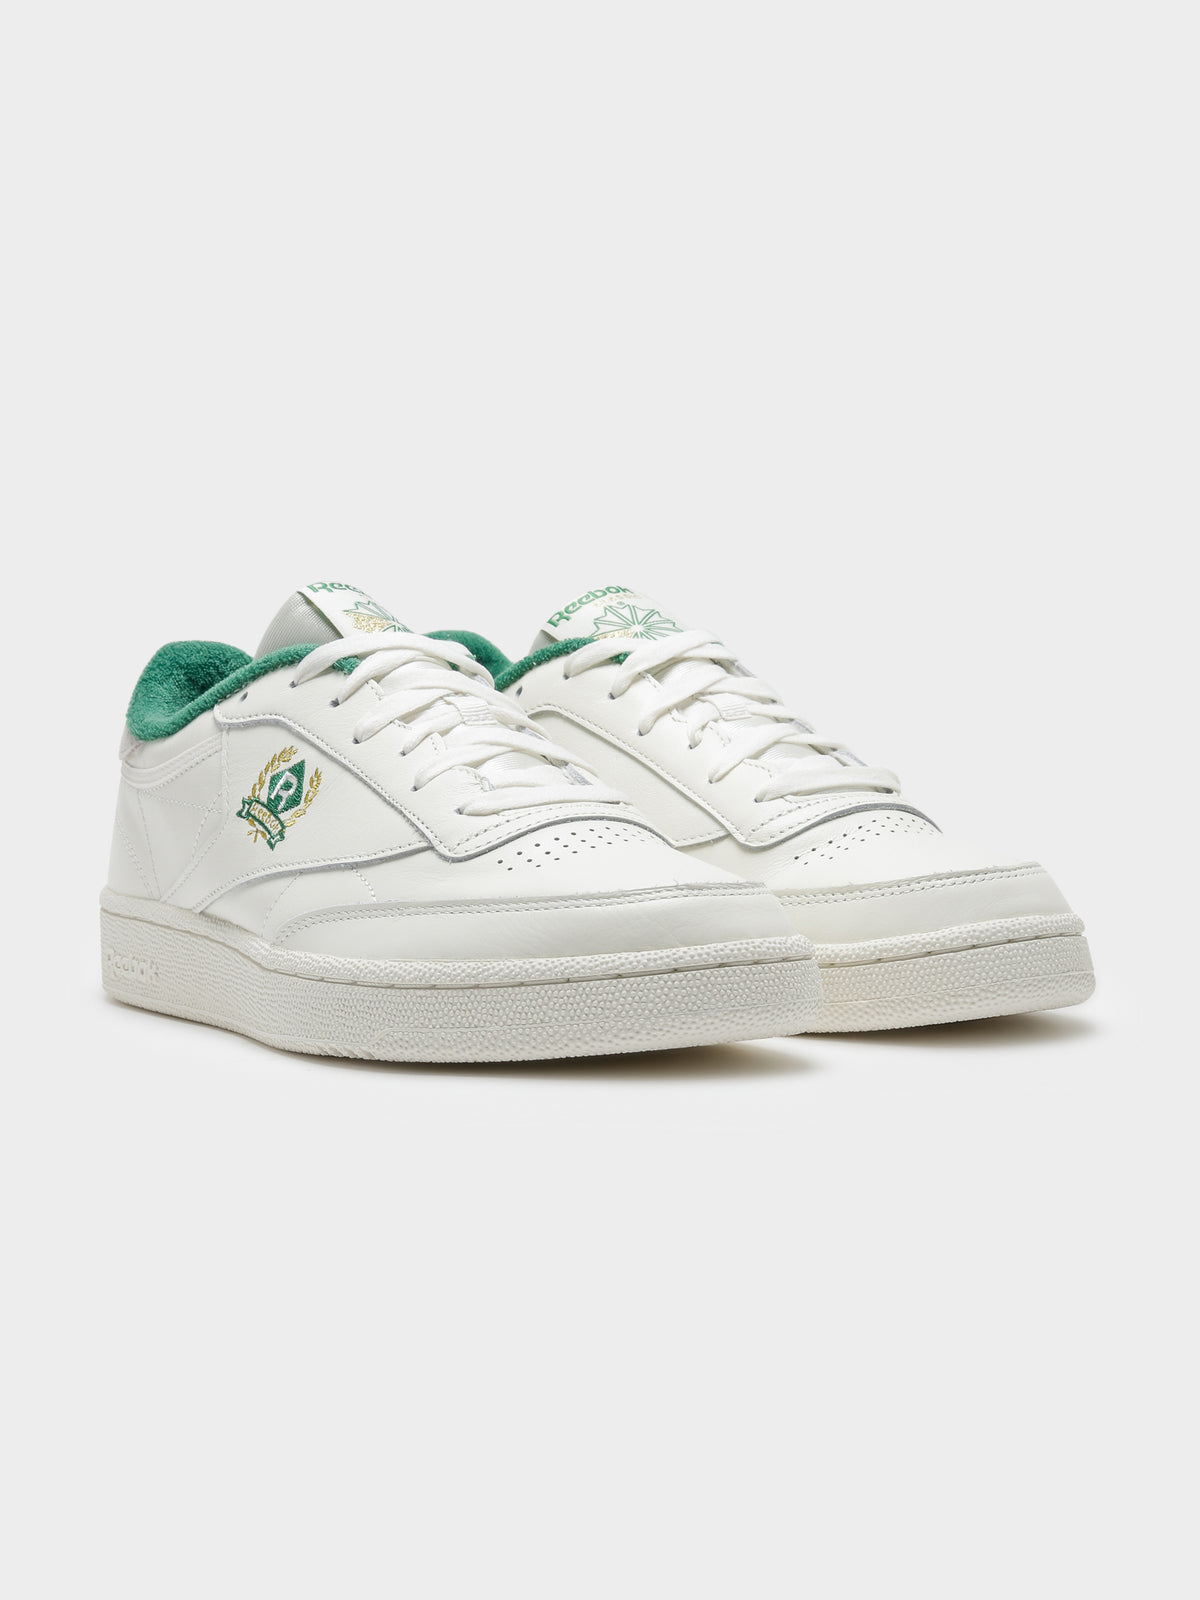 Mens Club C 85 Sneakers in White &amp; Green